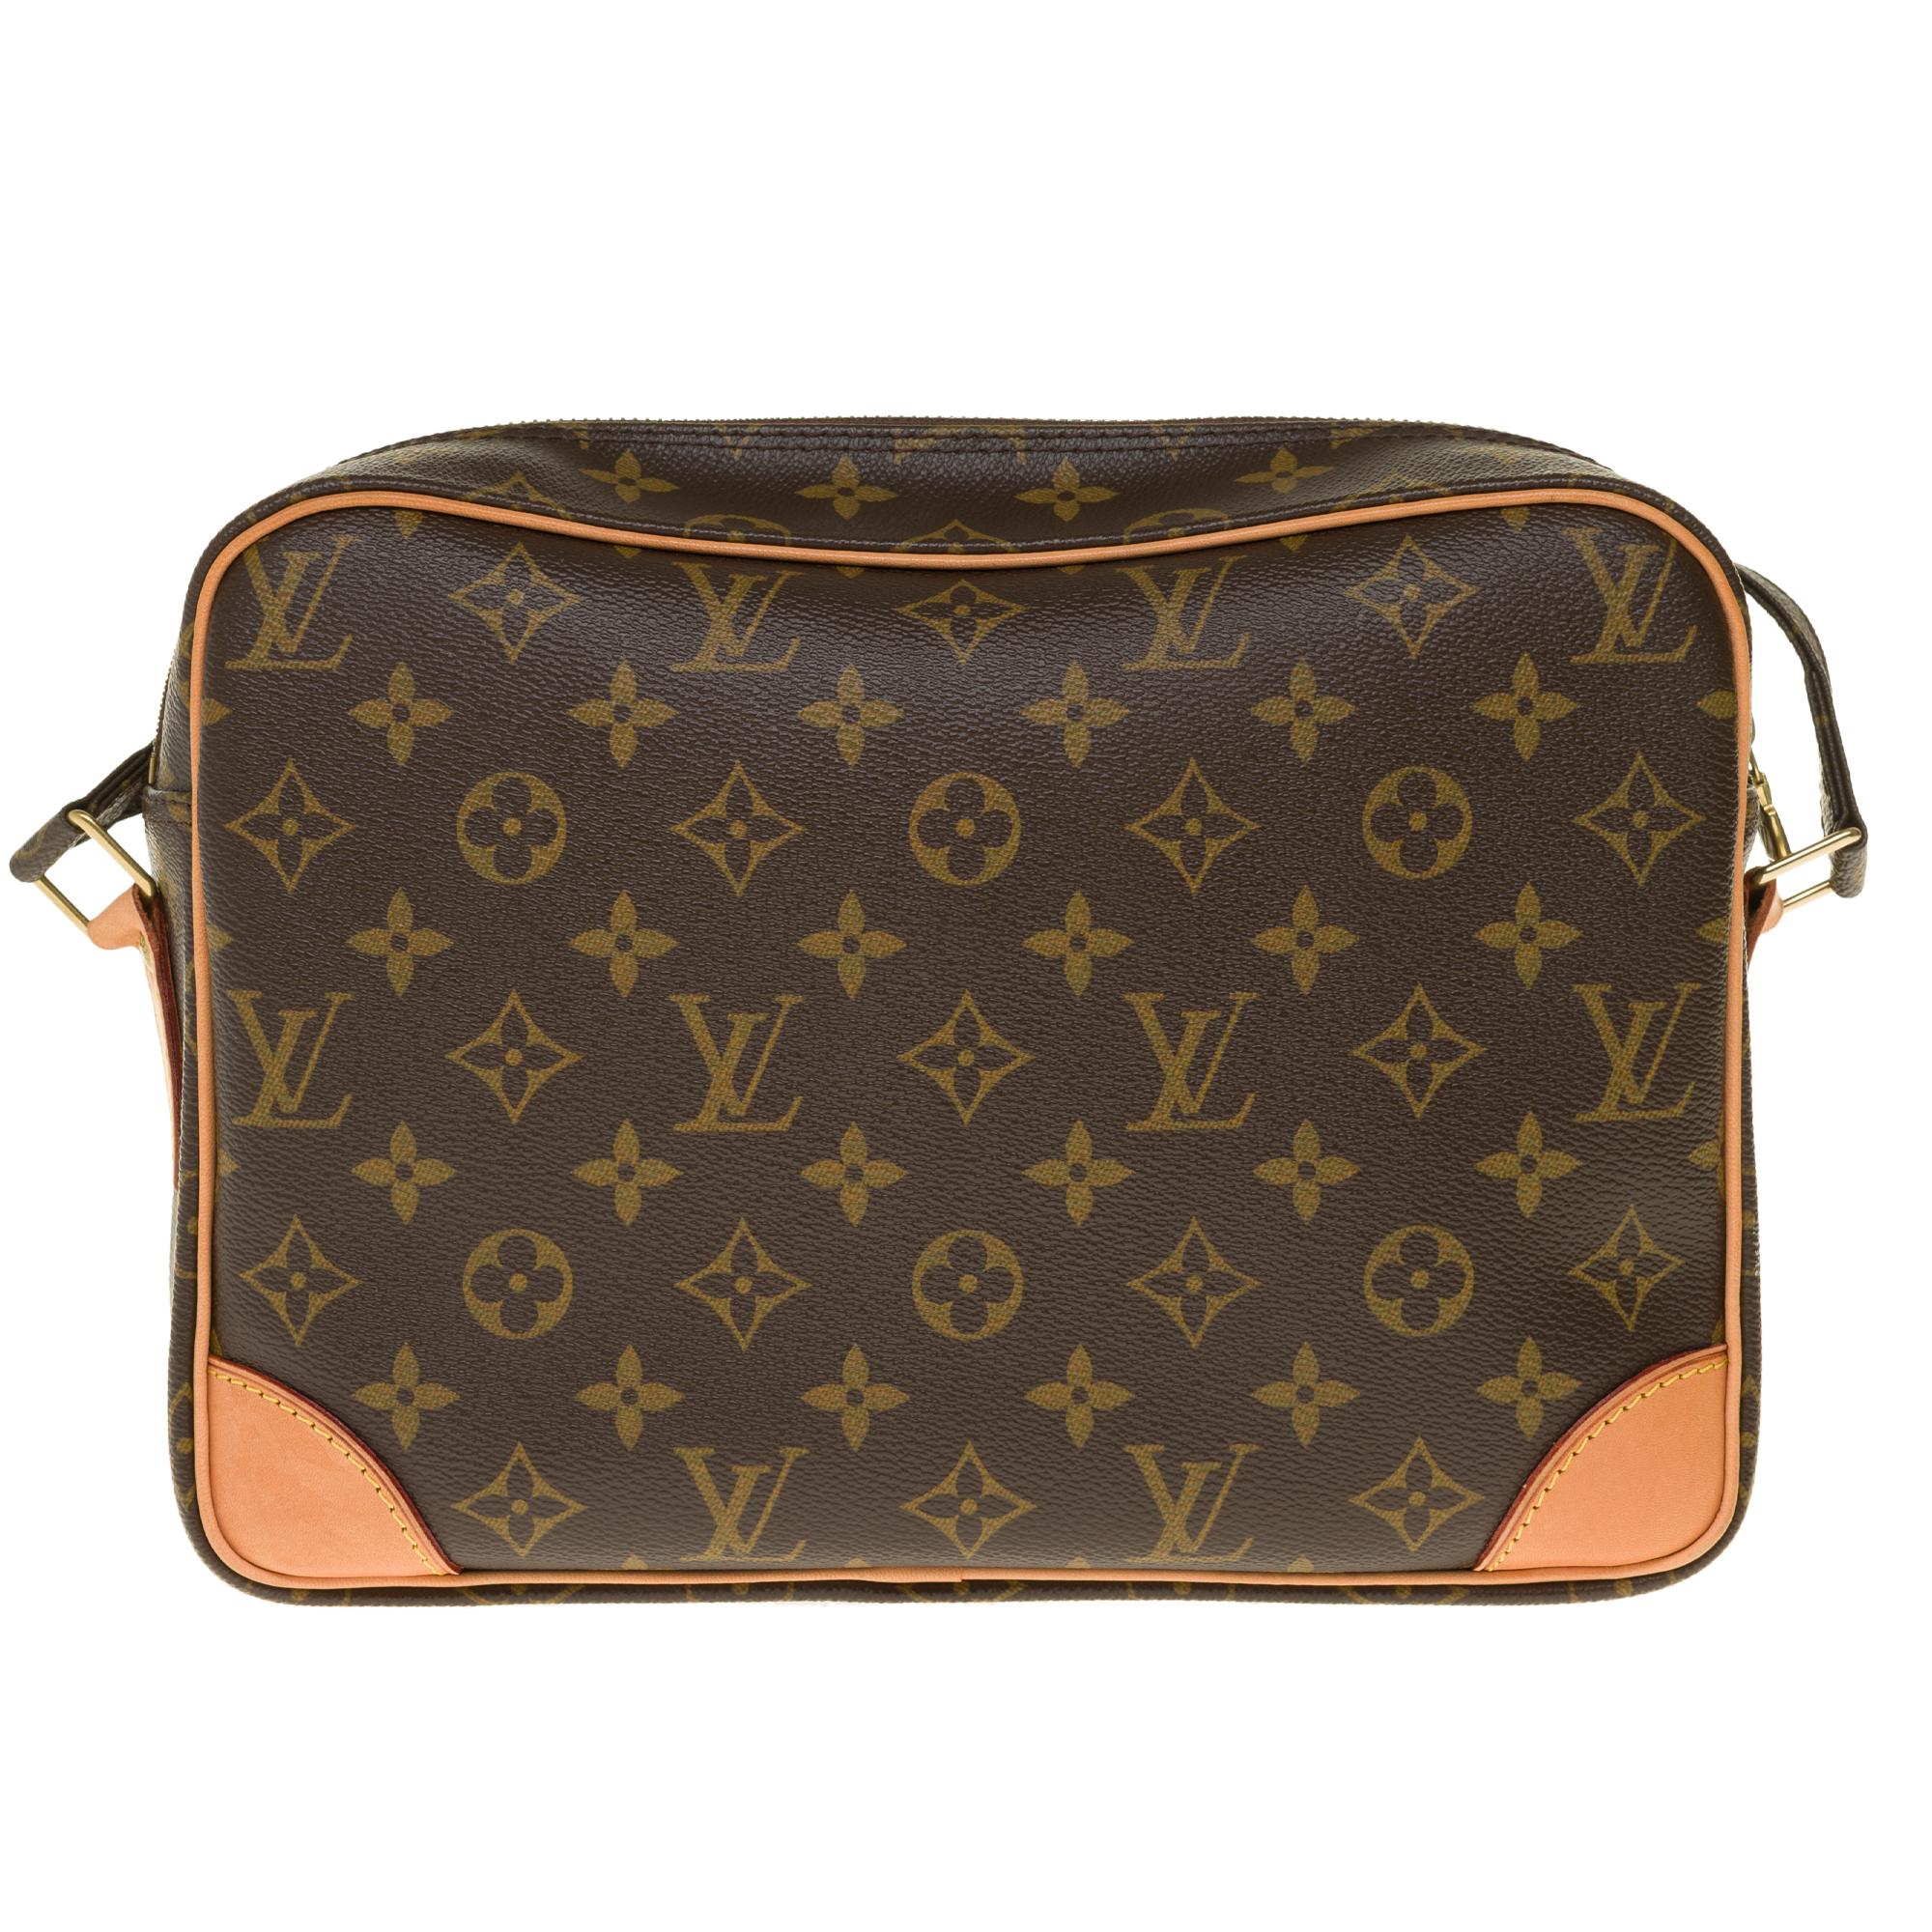 Spacious and practical unisex LV monogram coated canvas Nile MM messenger bag with brass hardware, tan vachetta leather trim, adjustable flat LV monogram shoulder strap featuring a Louis Vuitton embossed anti-slip shoulder grip pad, exterior zip